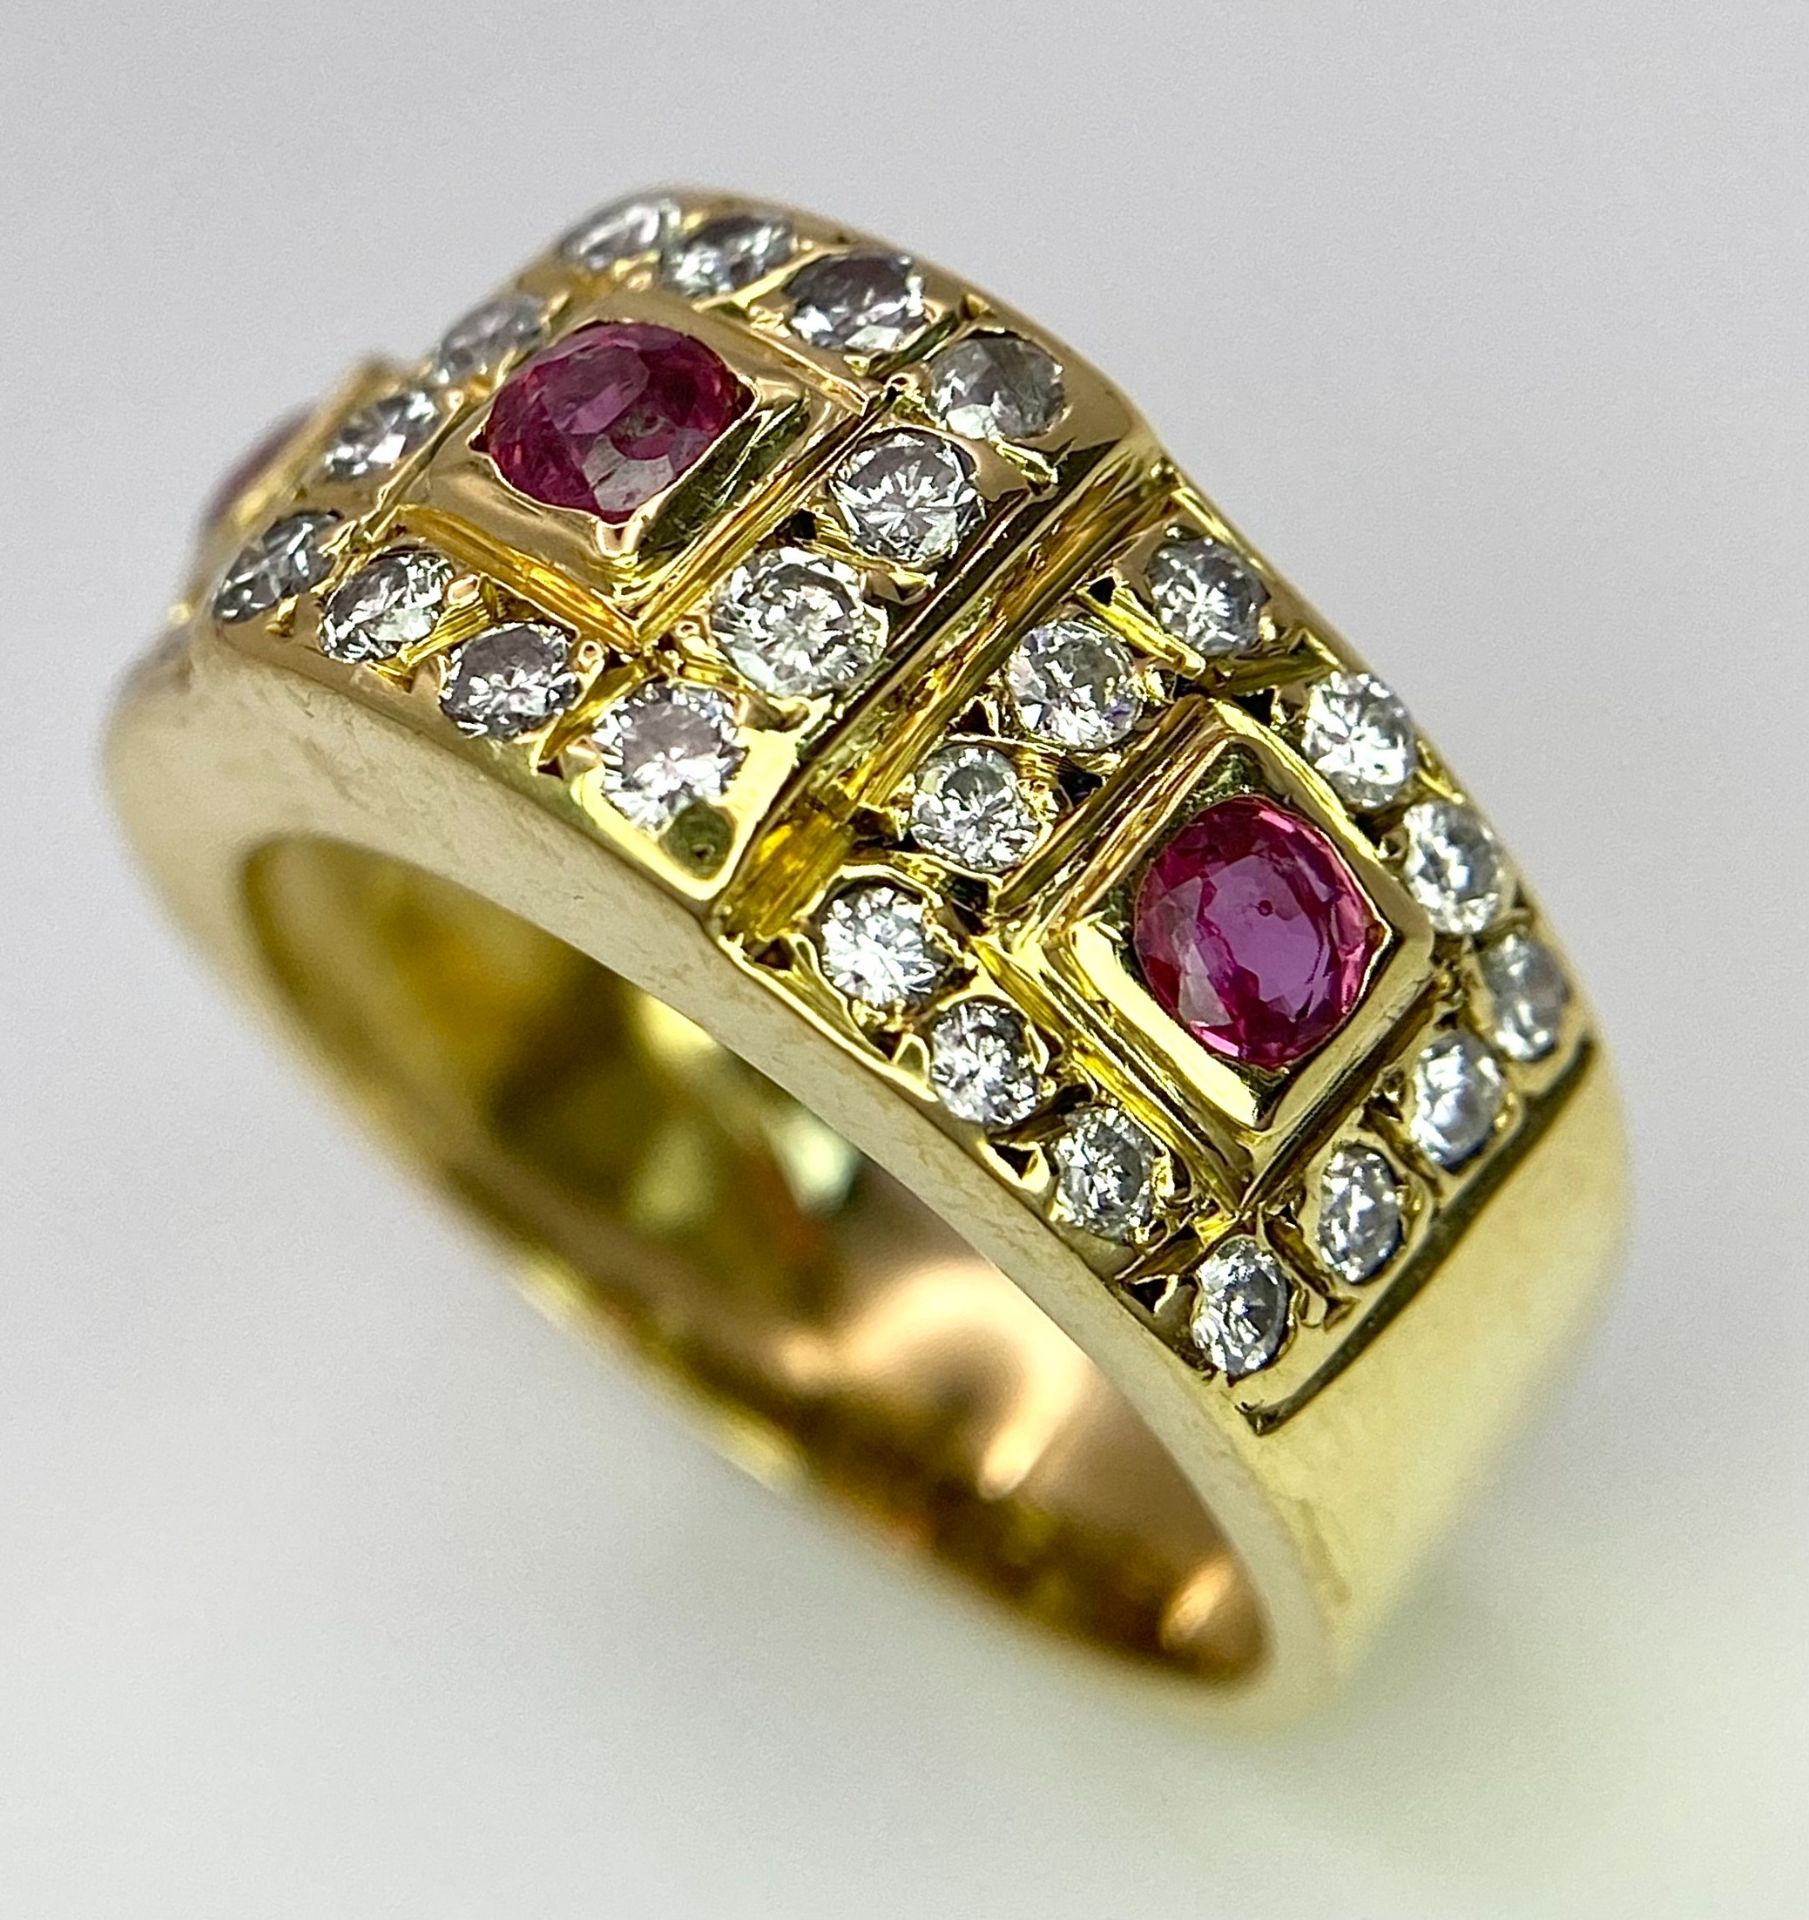 AN 18K YELLOW GOLD DIAMOND & RUBY RING. 0.60ctw, size K, 6.8g total weight. Ref: SC 8072 - Image 4 of 9